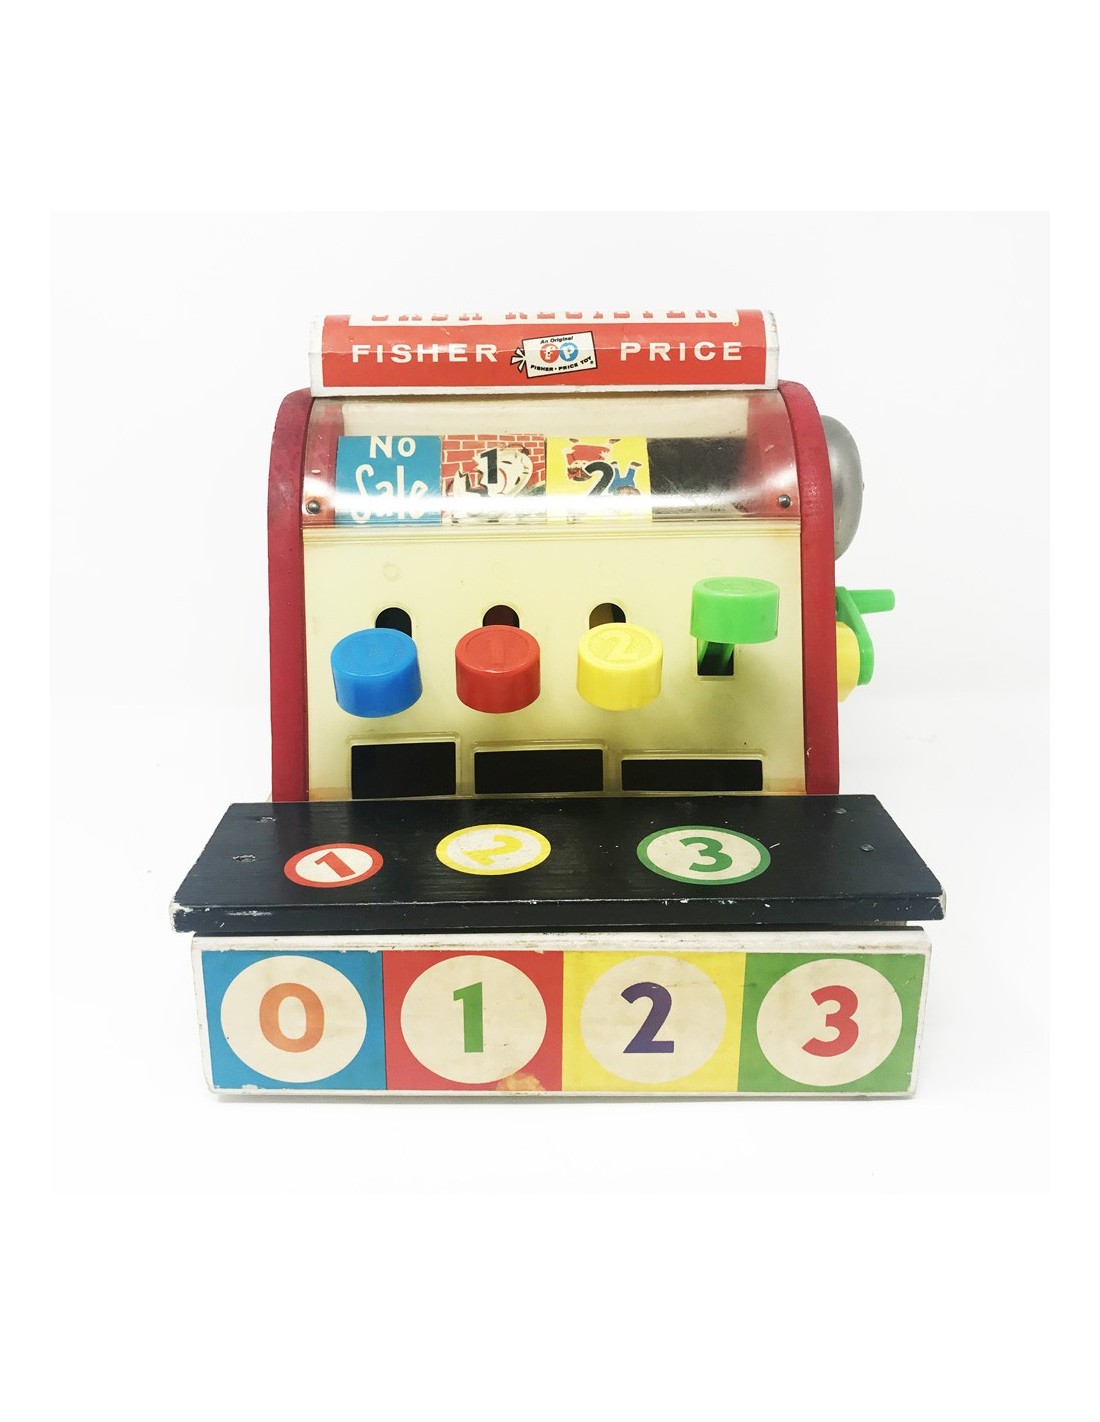 caisse fisher price vintage